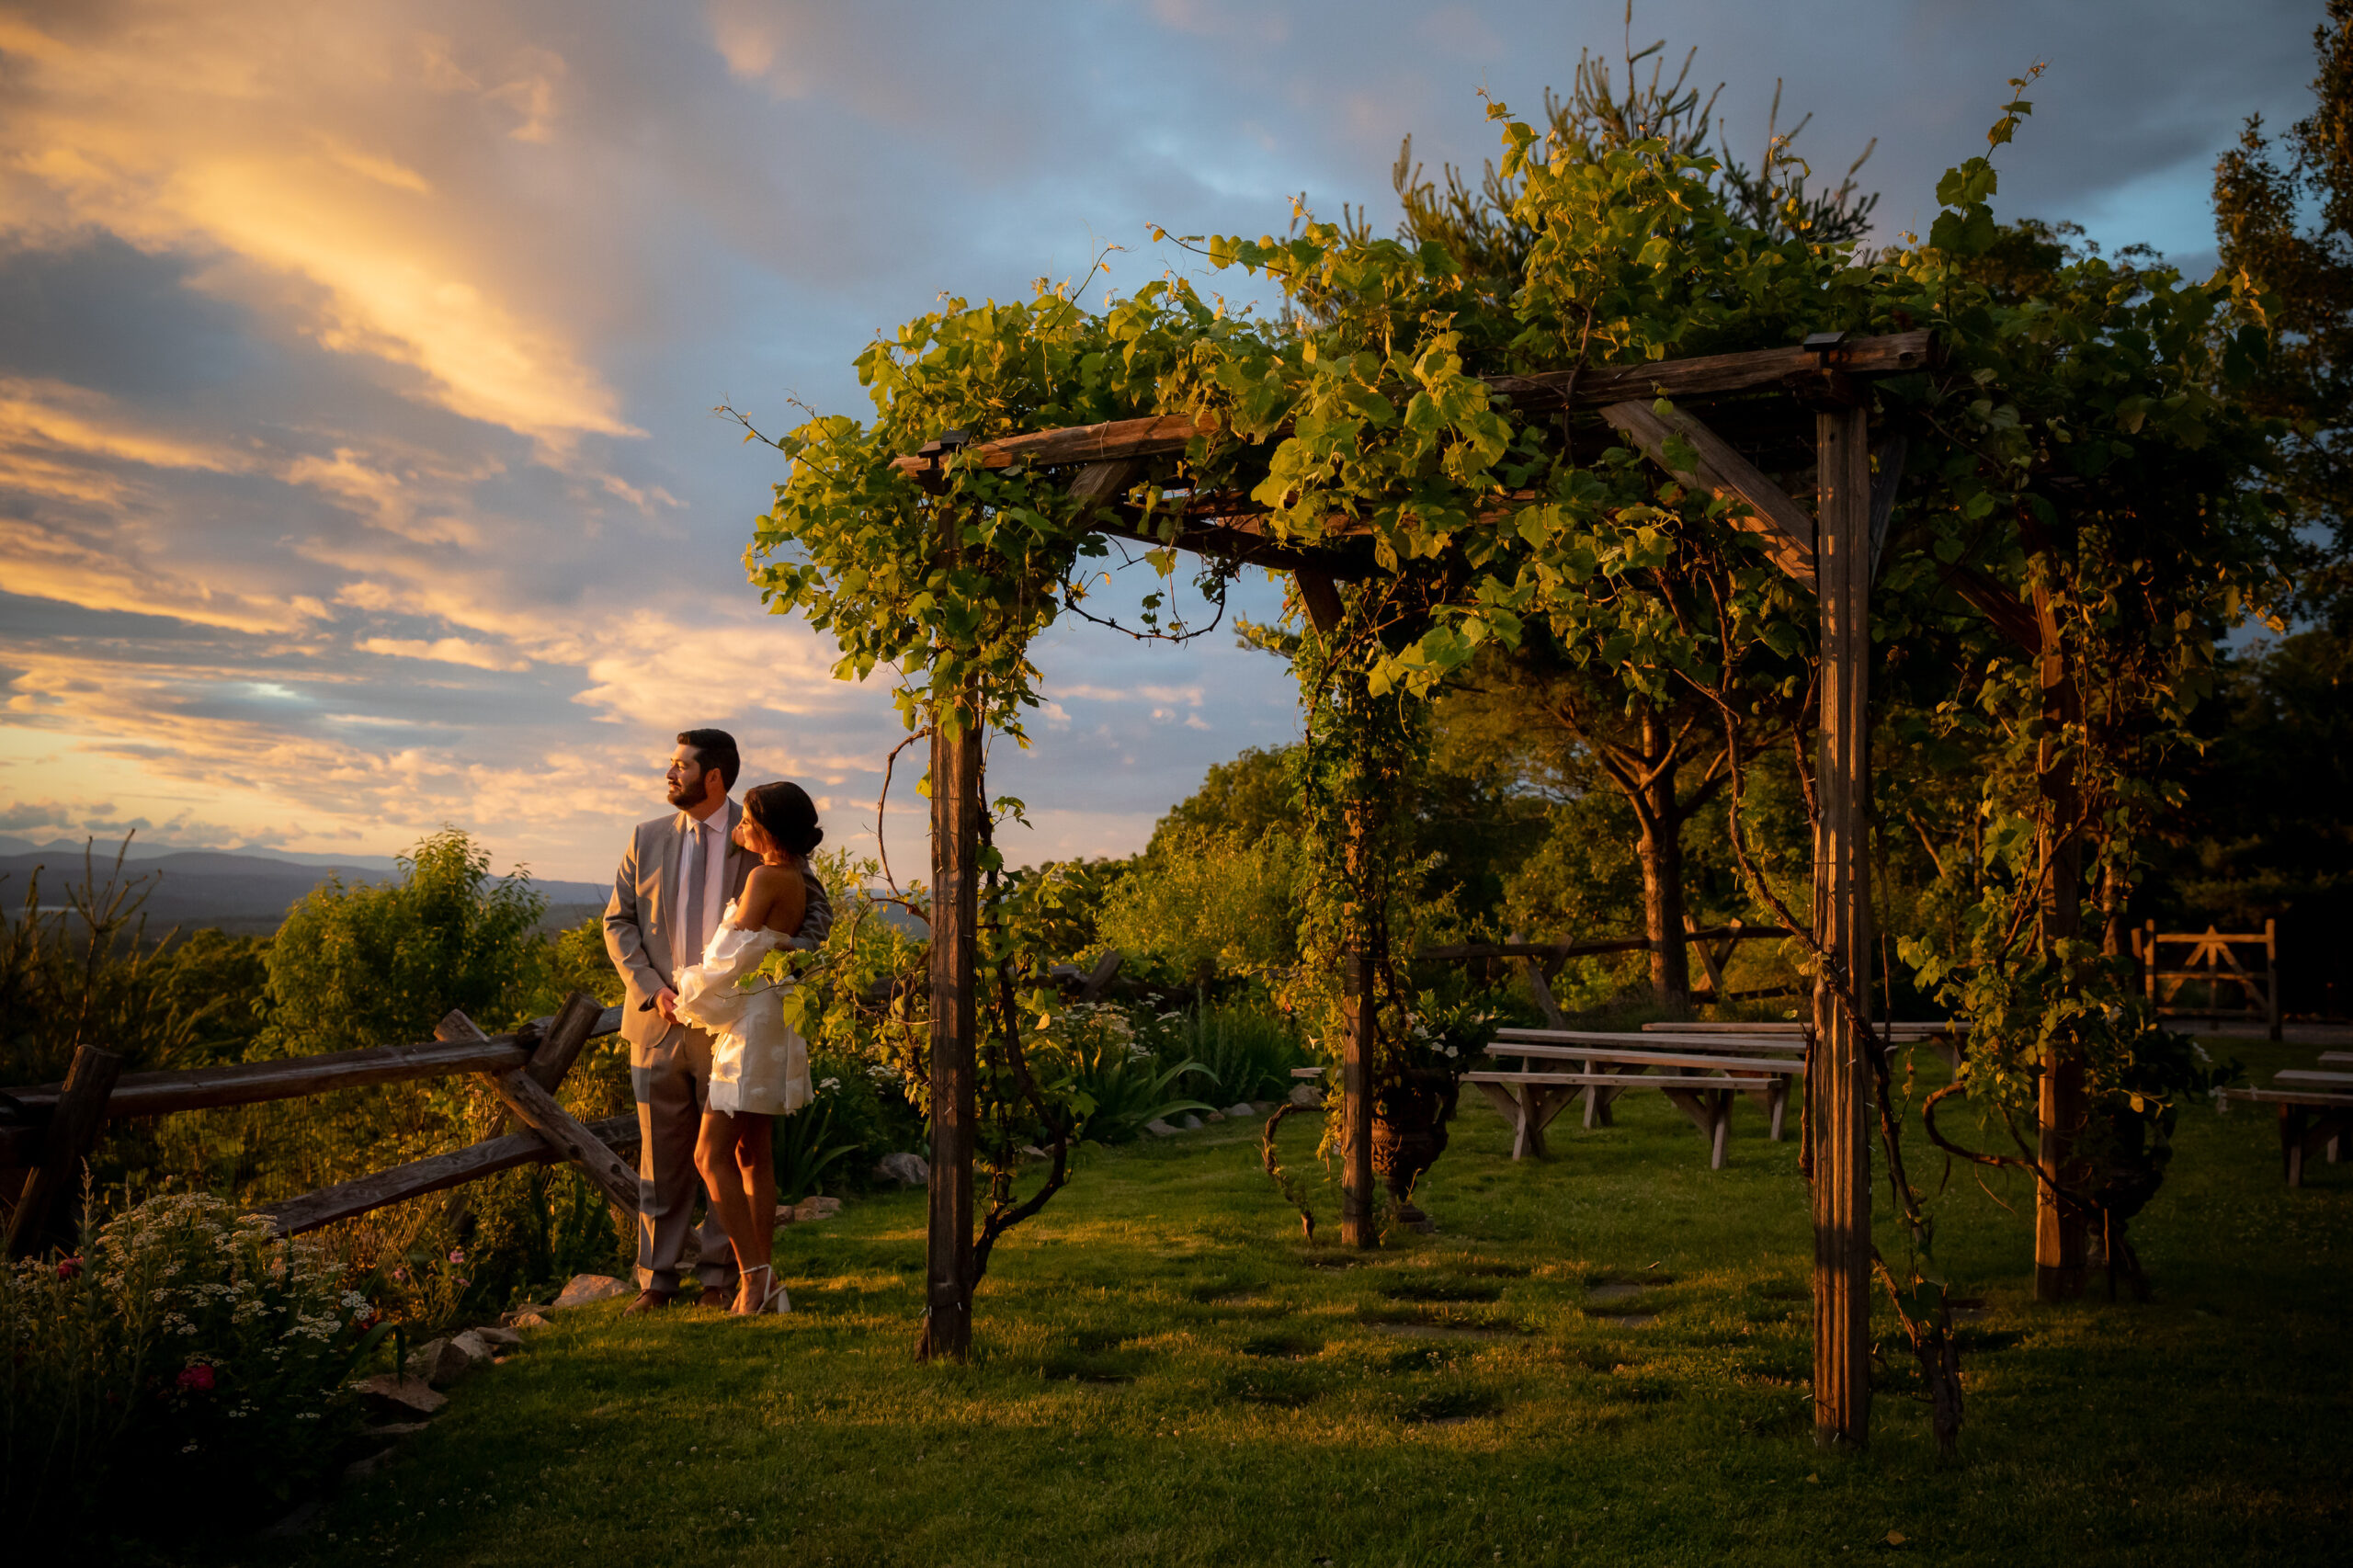 Lamb's Hill bride and groom admire sunset and enjoy wedding planning while overlooking the Hudson Valley.  